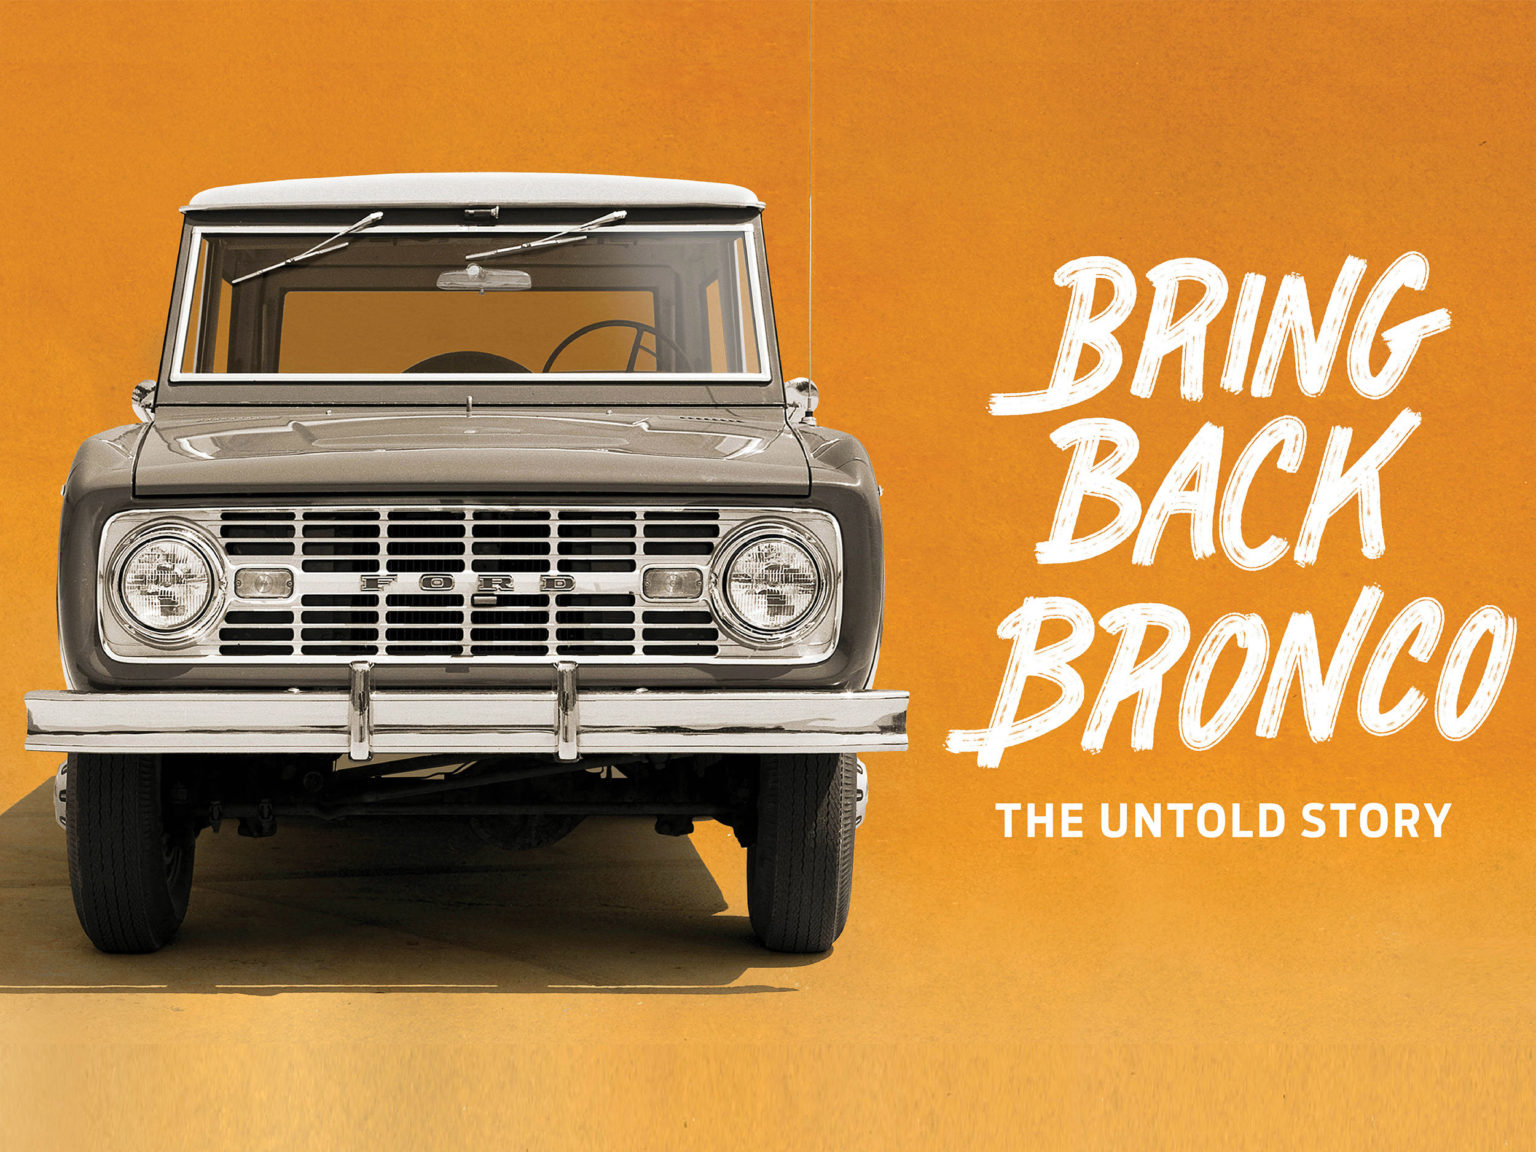 A new podcast sheds light on the history of the Ford Bronco